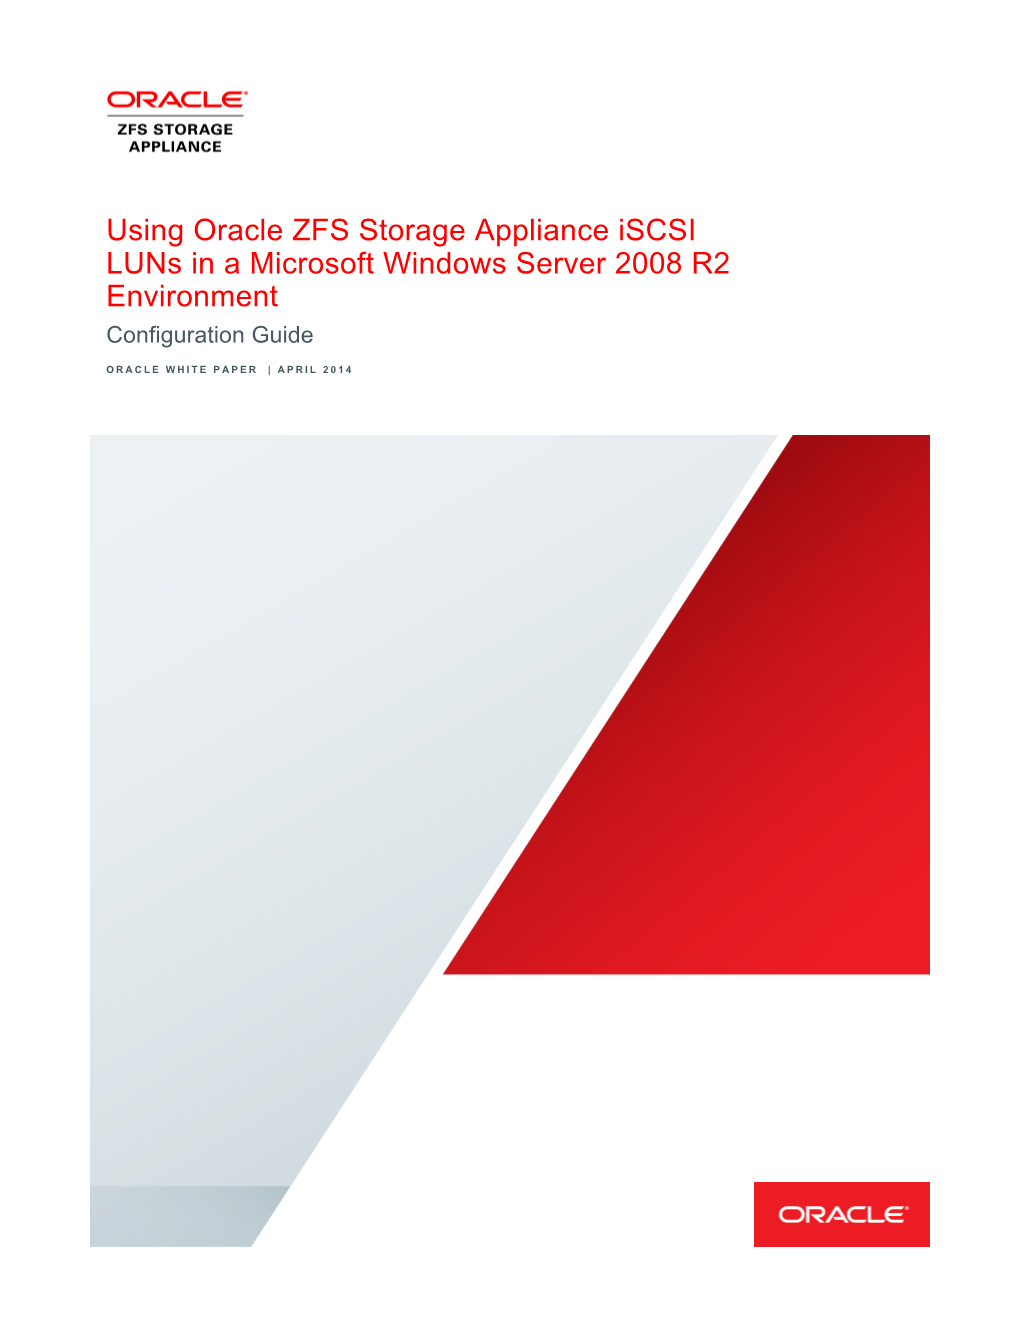 Using Oracle ZFS Storage Appliance Iscsi Luns in a Microsoft Windows Server 2008 R2 Environment Configuration Guide